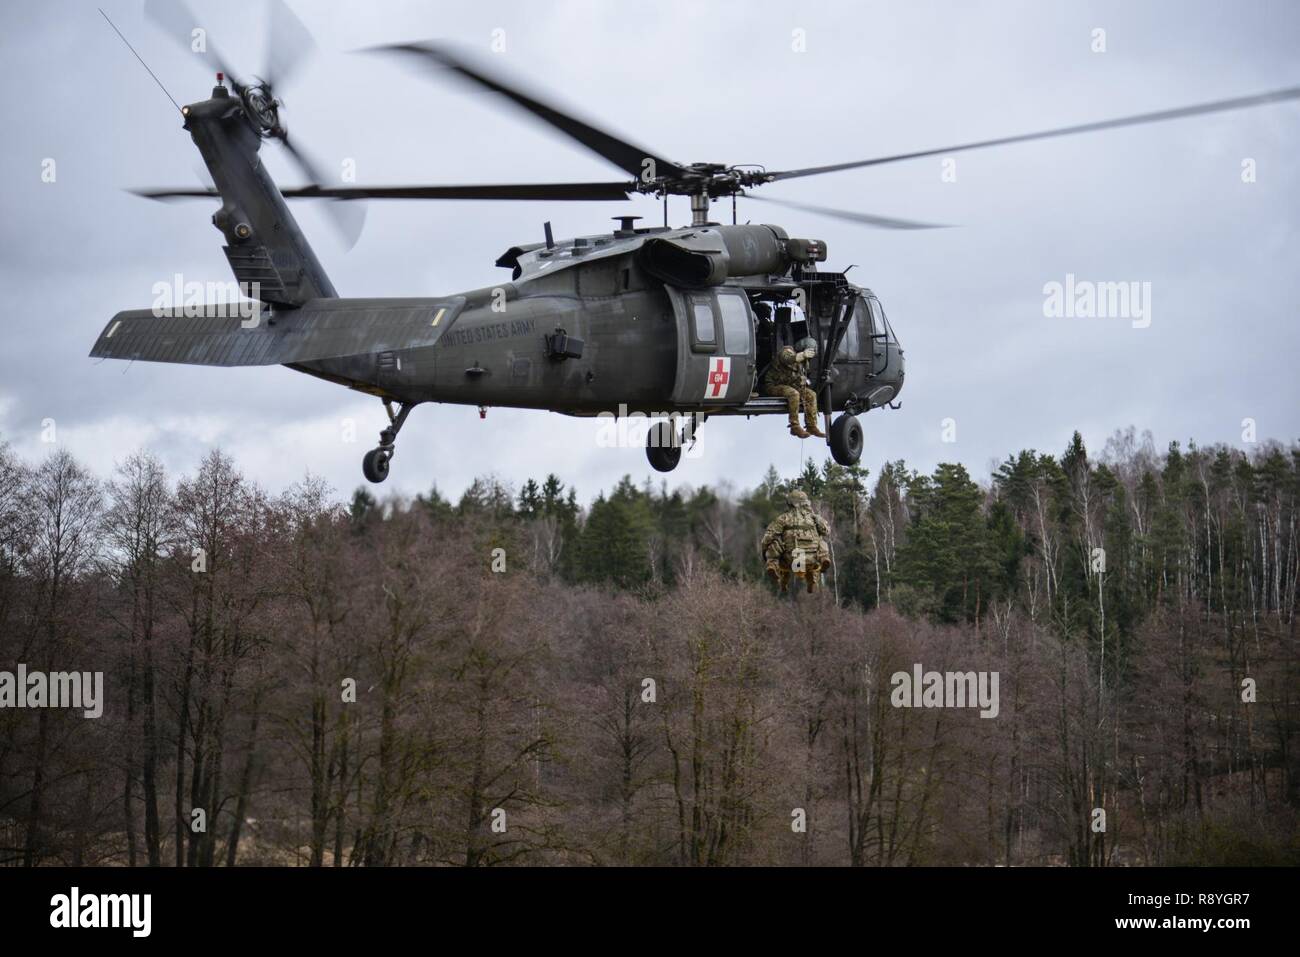 A UH-60 Blackhawk, operated by U.S. Soldiers, assigned to 12th Combat Aviation Brigade, hoists U.S. Soldiers, assigned to the 1st Squadron, 2nd Cavalry Regiment, as they conduct different types of Medical Evacuations, at the 7th Army Training Command’s Grafenwoehr Training Area, Germany, Feb. 28, 2017. The Soldiers conducted MEDEVAC training to develop the ability to team up with flight medics to safely transport patients by a helicopter. Stock Photo